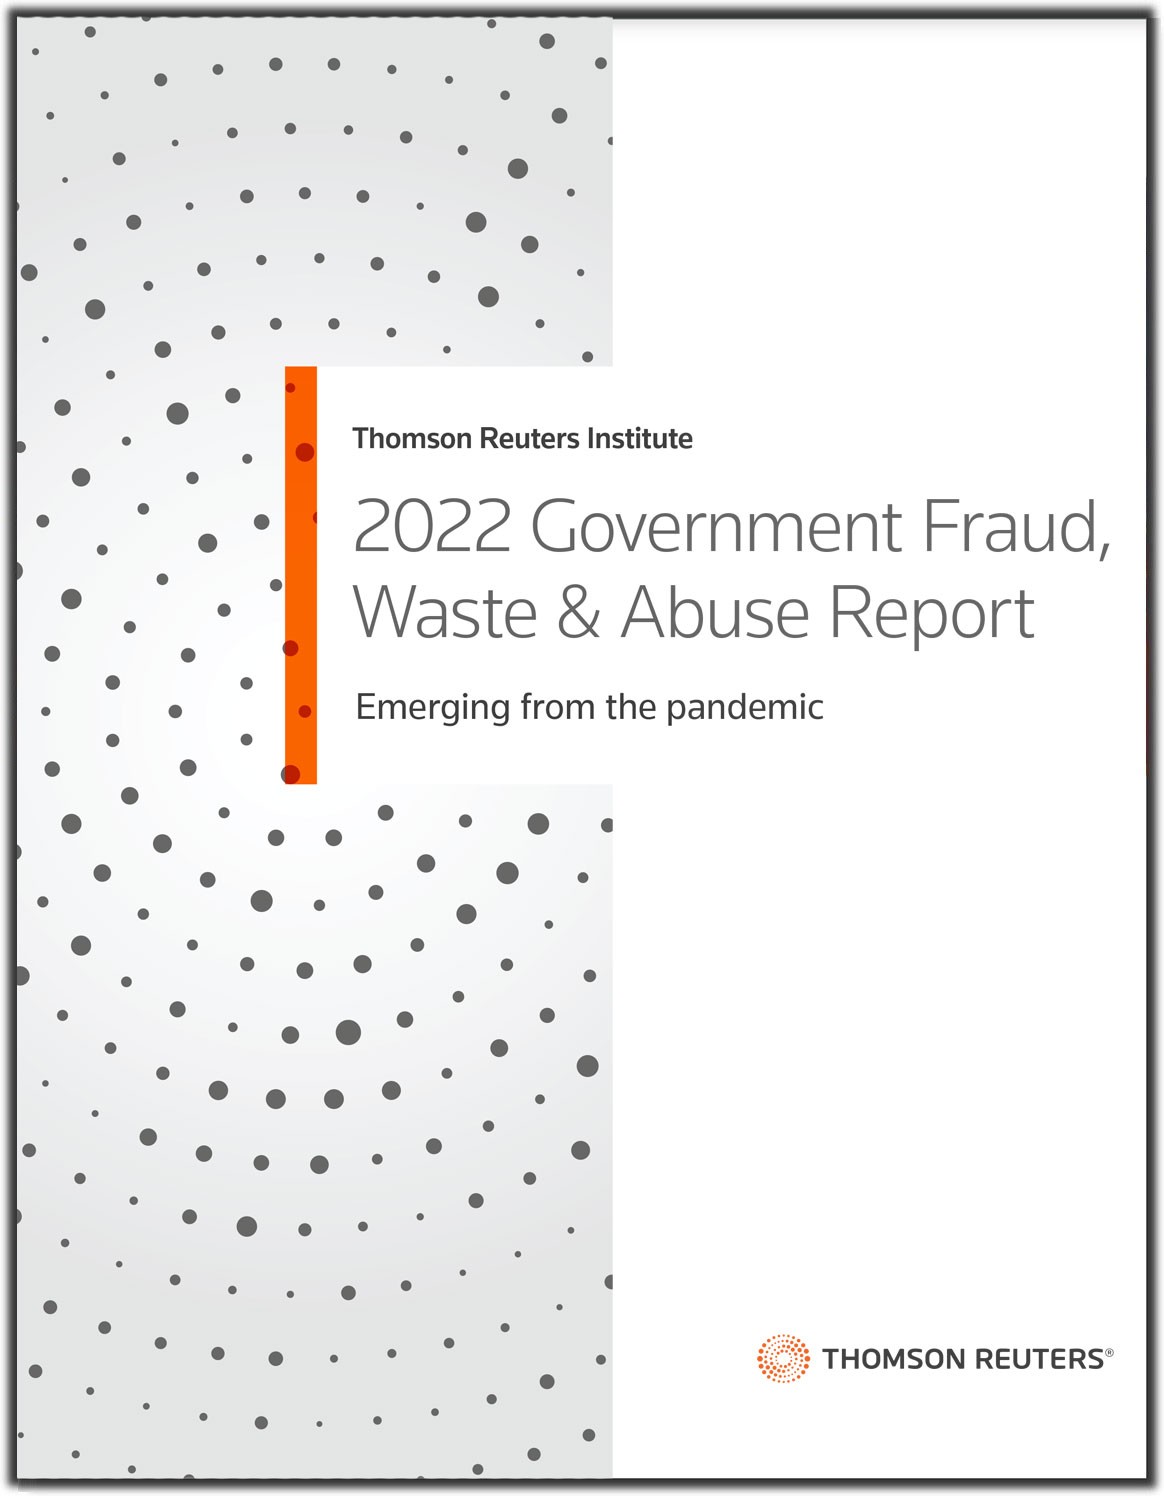 Thomson Reuters 2022 Government Fraud, Waste, & Abuse Report